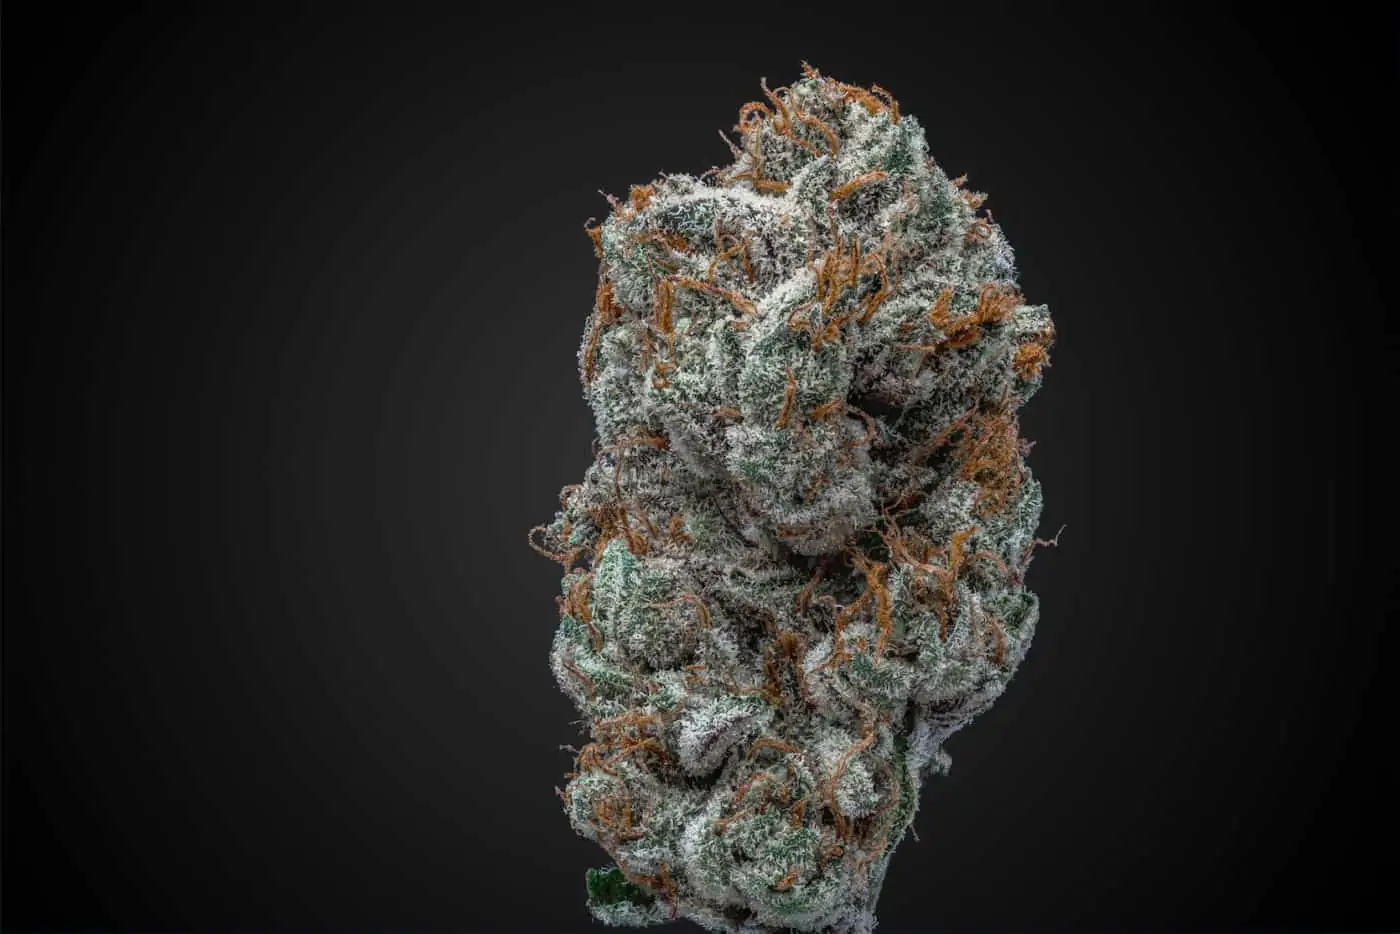 Medellin Weed Strain Review & Information